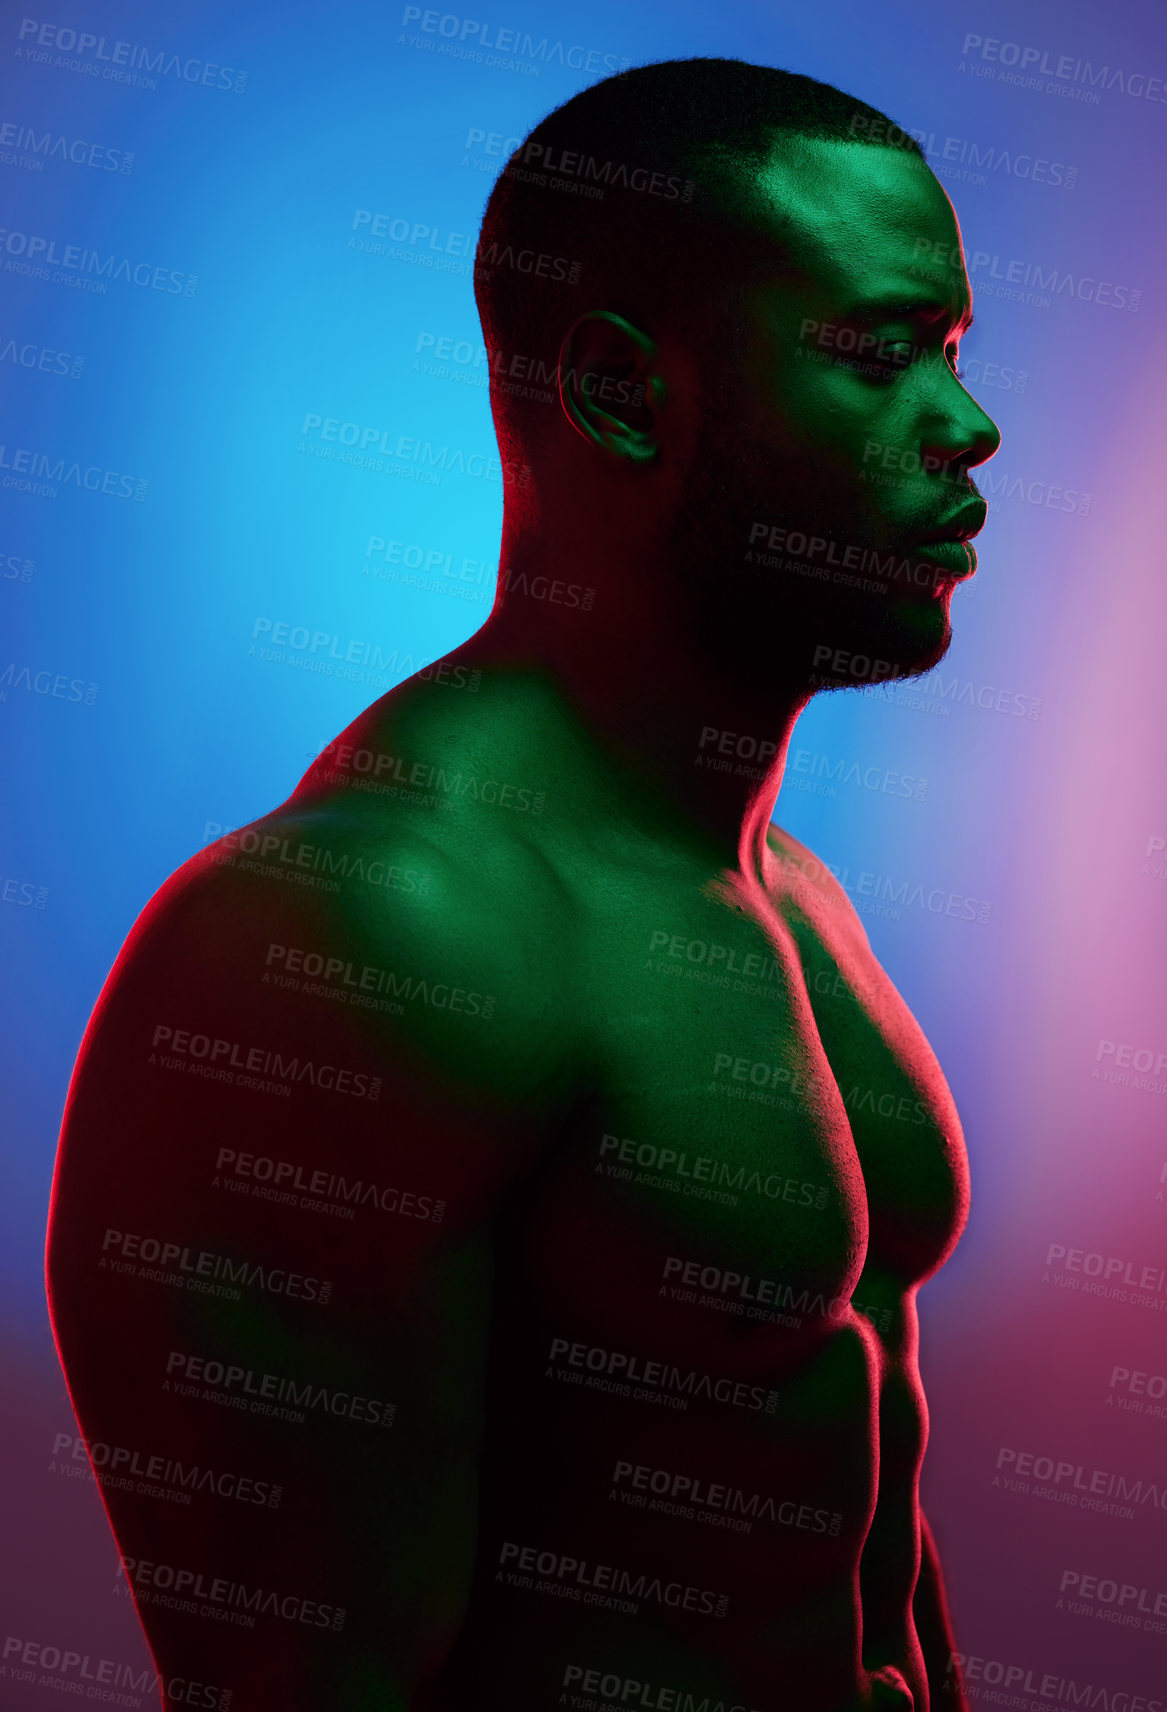 Buy stock photo Studio shot of a man posing shirtless against a neon background